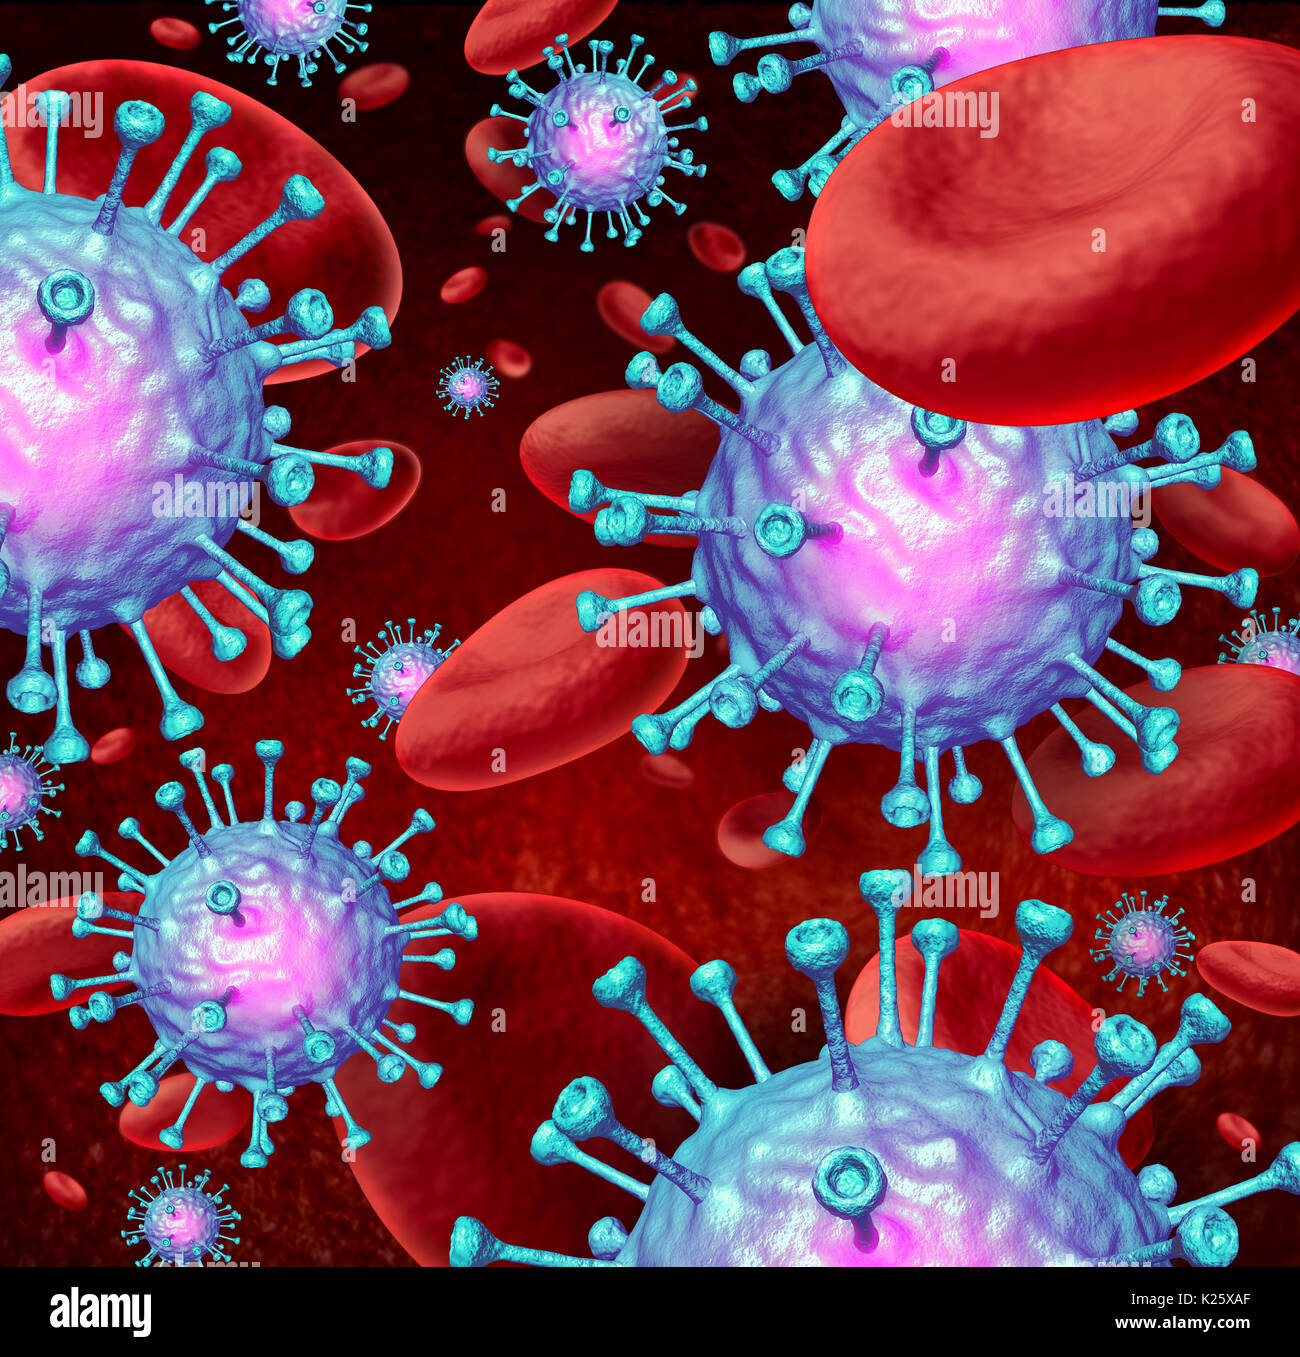 Immunotherapy lymphocyte cells with blood as a concept of the immune system representing the control of cancer through immunology. Stock Photo